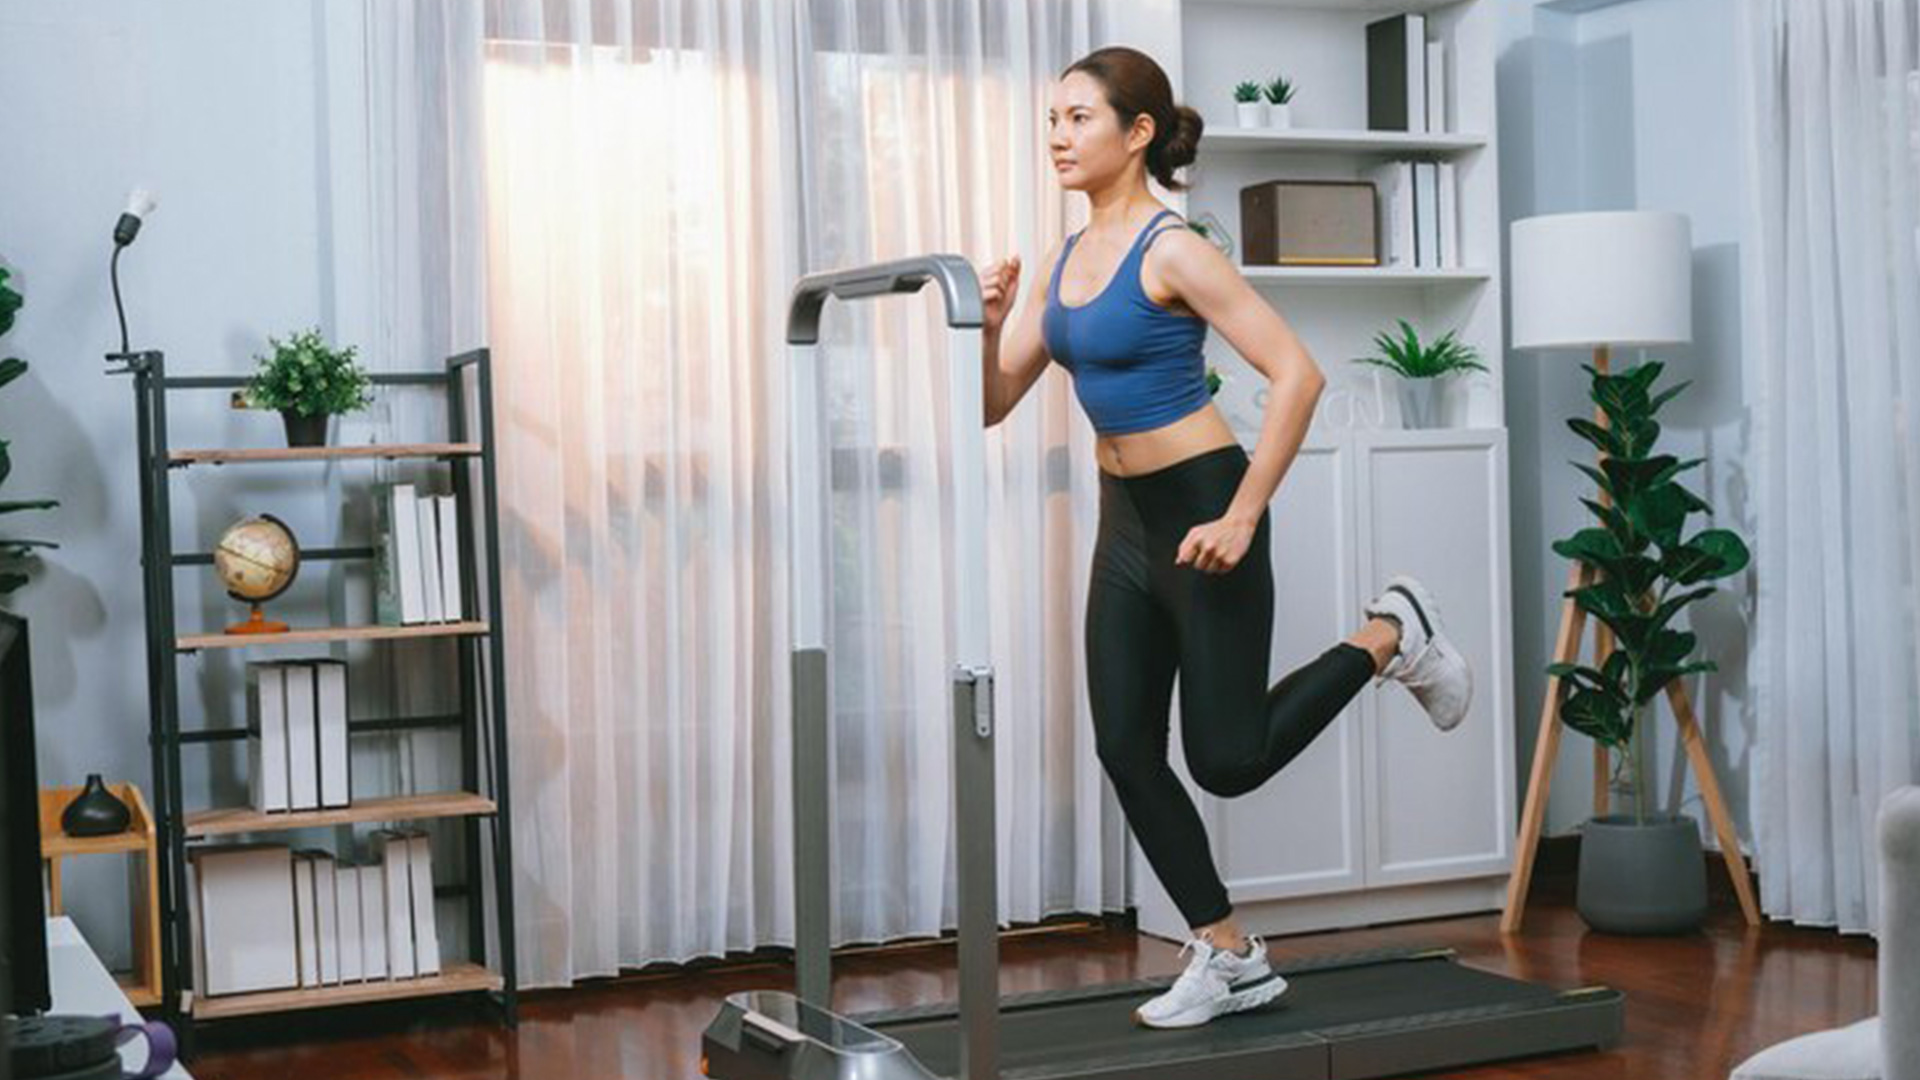 Winter Workouts to Stay Active Using Home Fitness Equipment